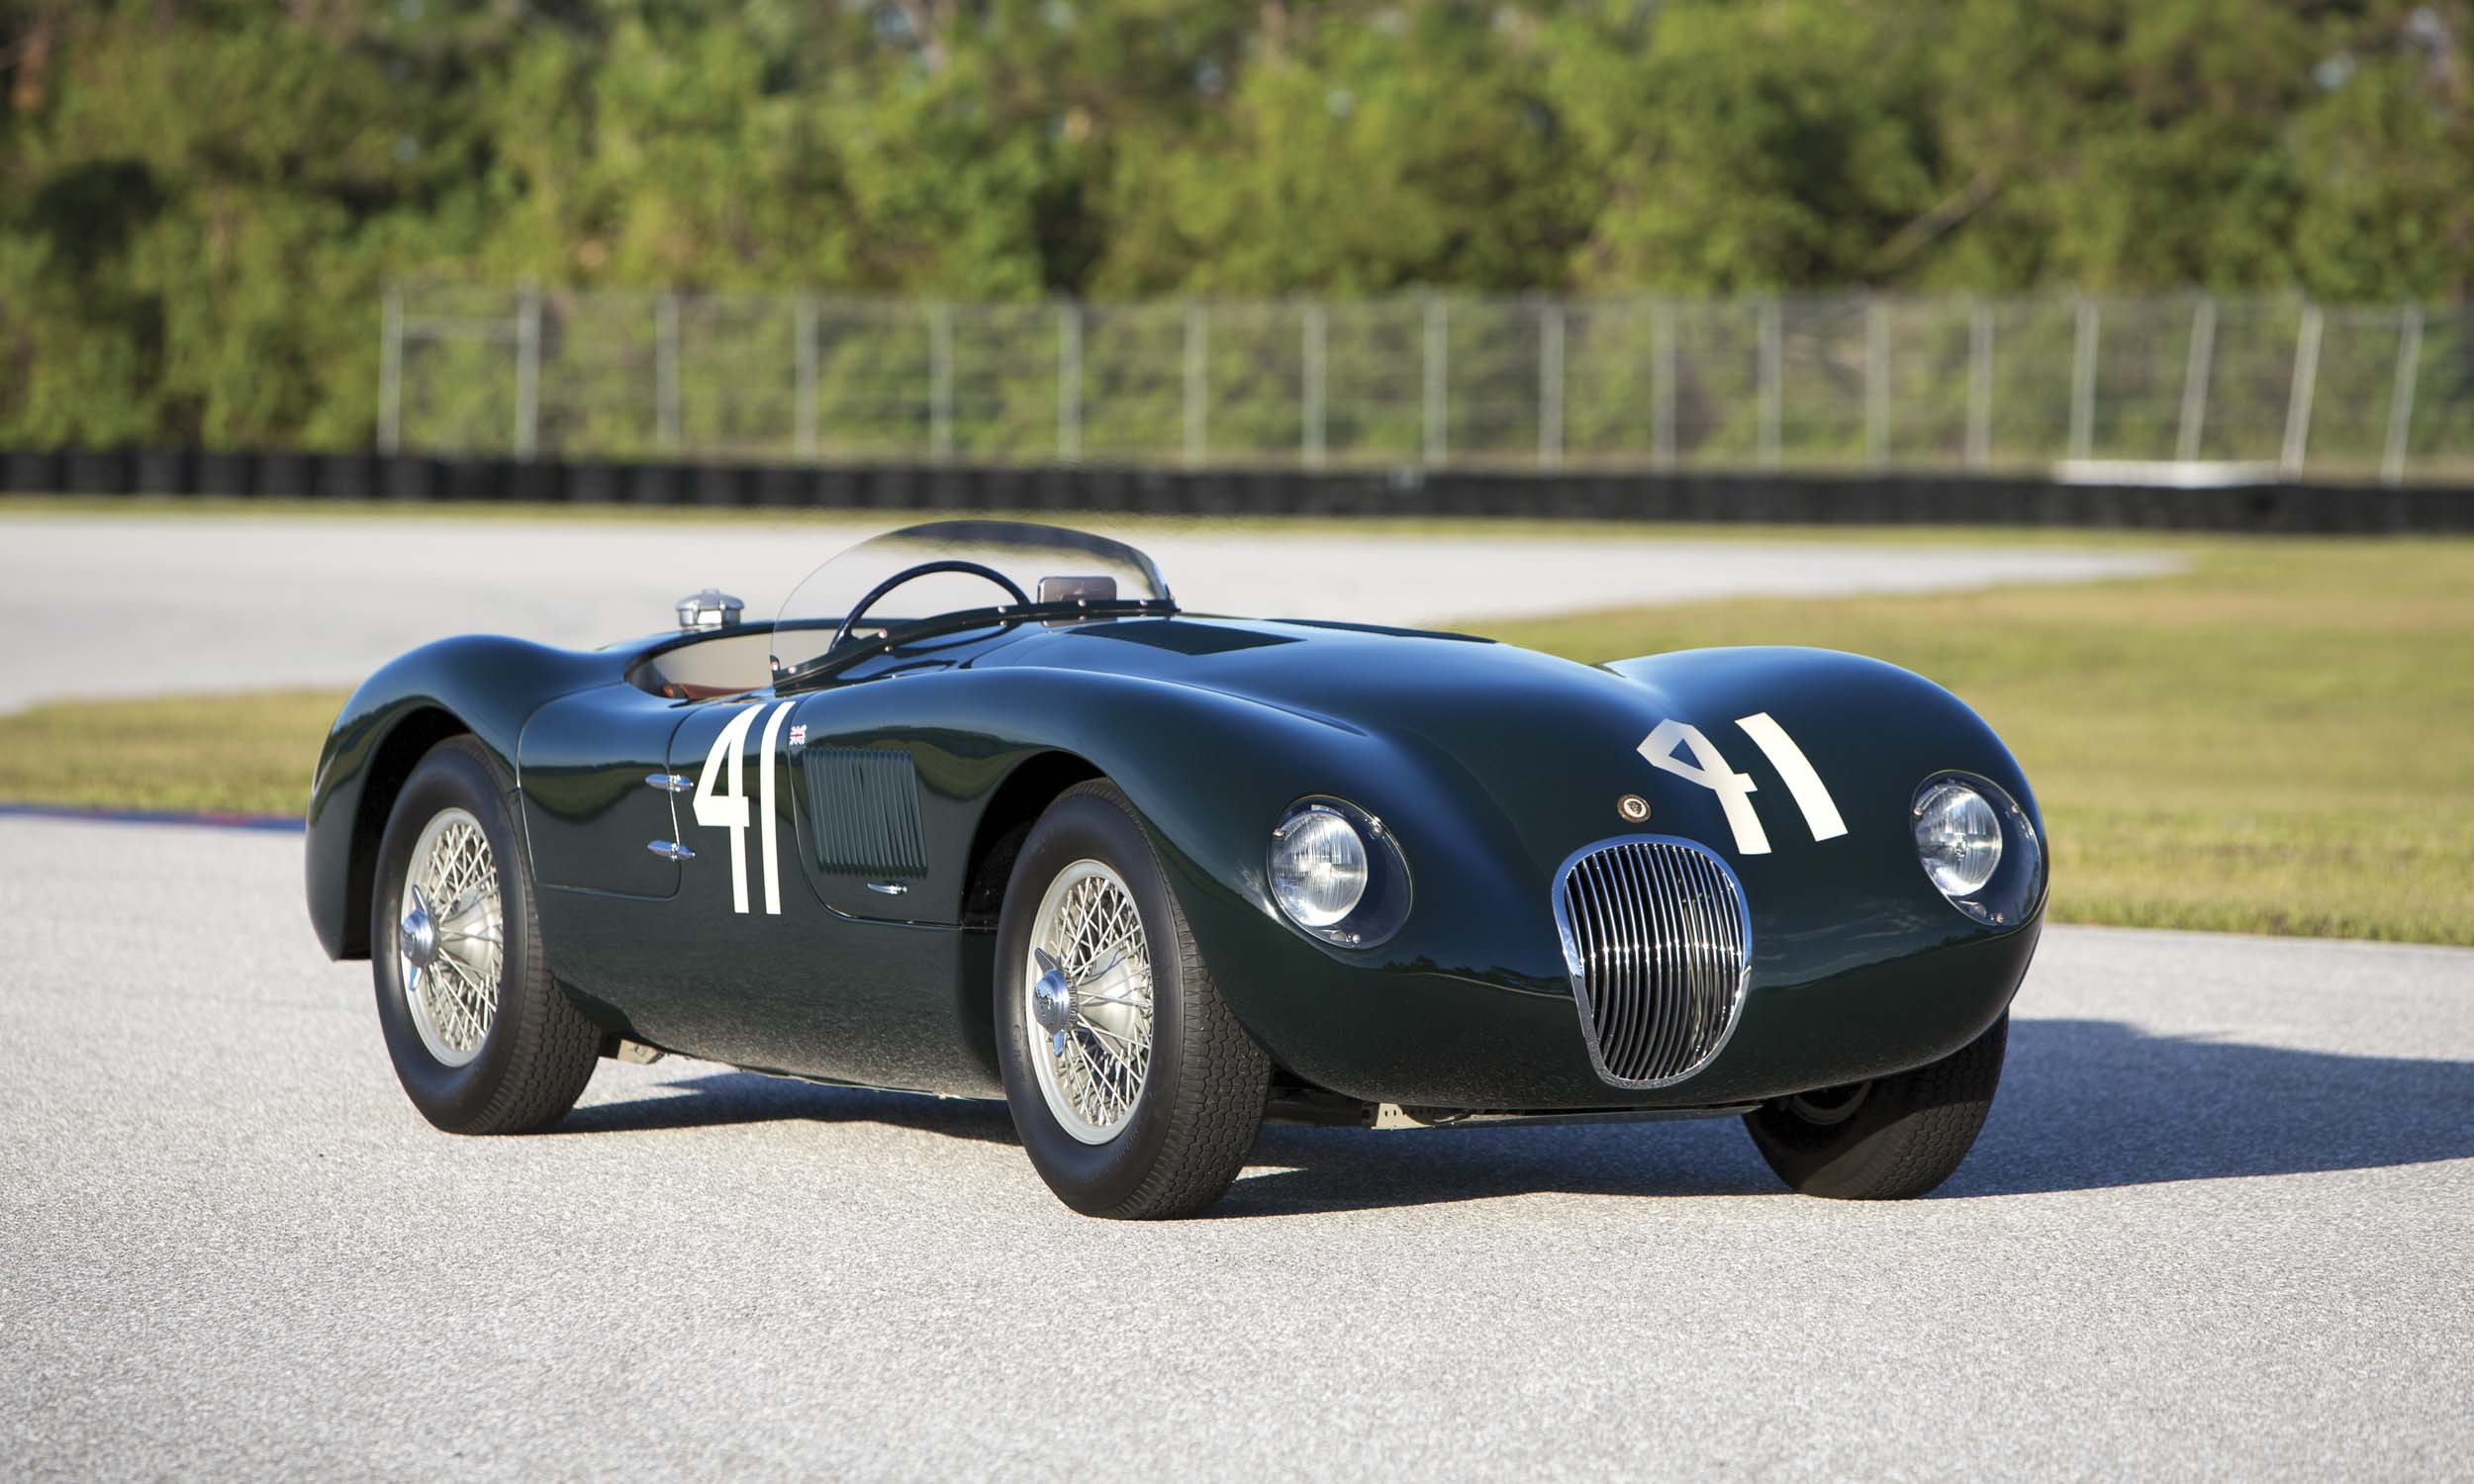 20 Collector Cars Sold for $180 Million in 2017